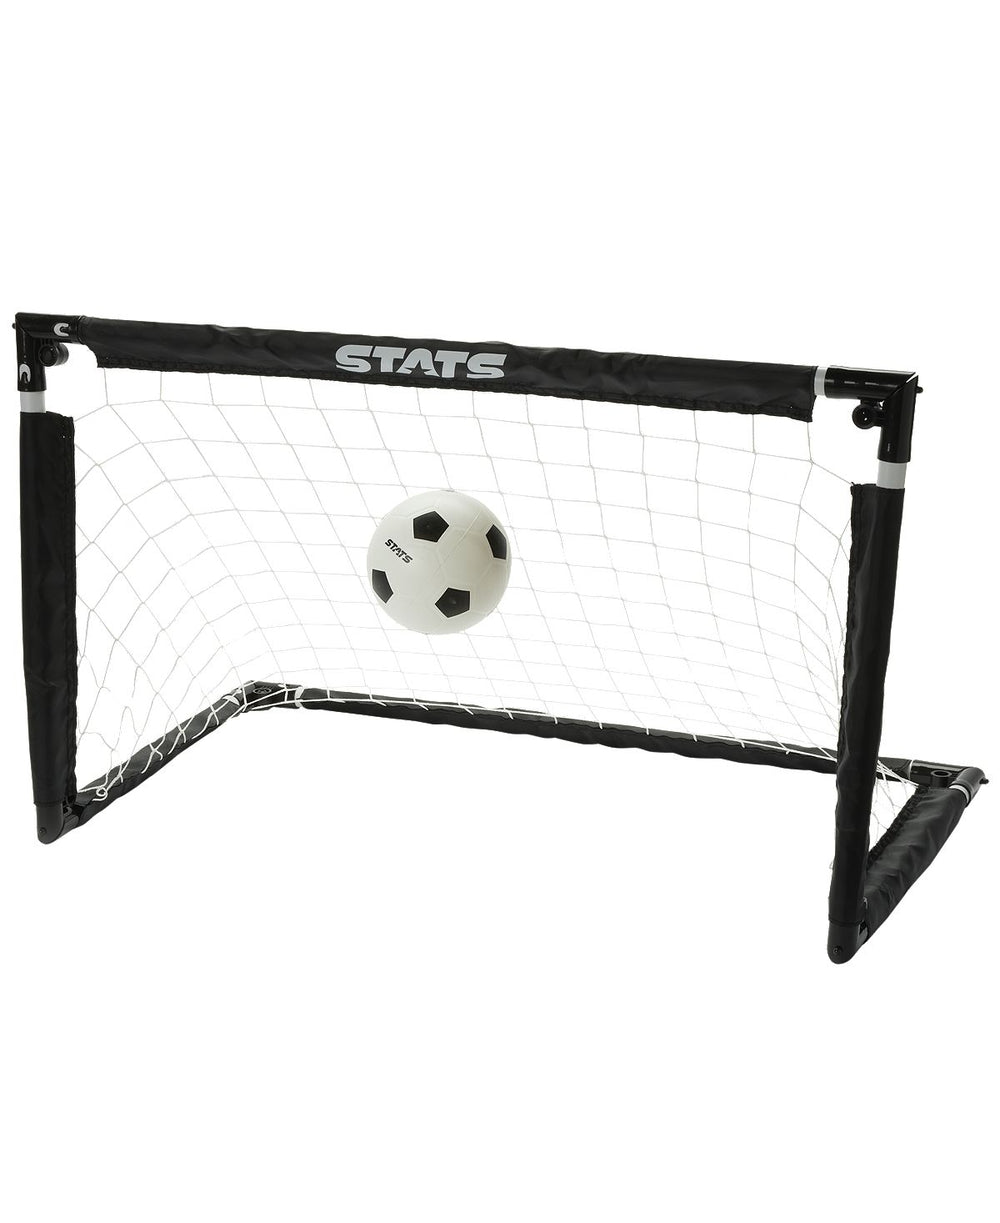 Stats Portable Soccer Goal, Ball, and Pump Play Set for Kids